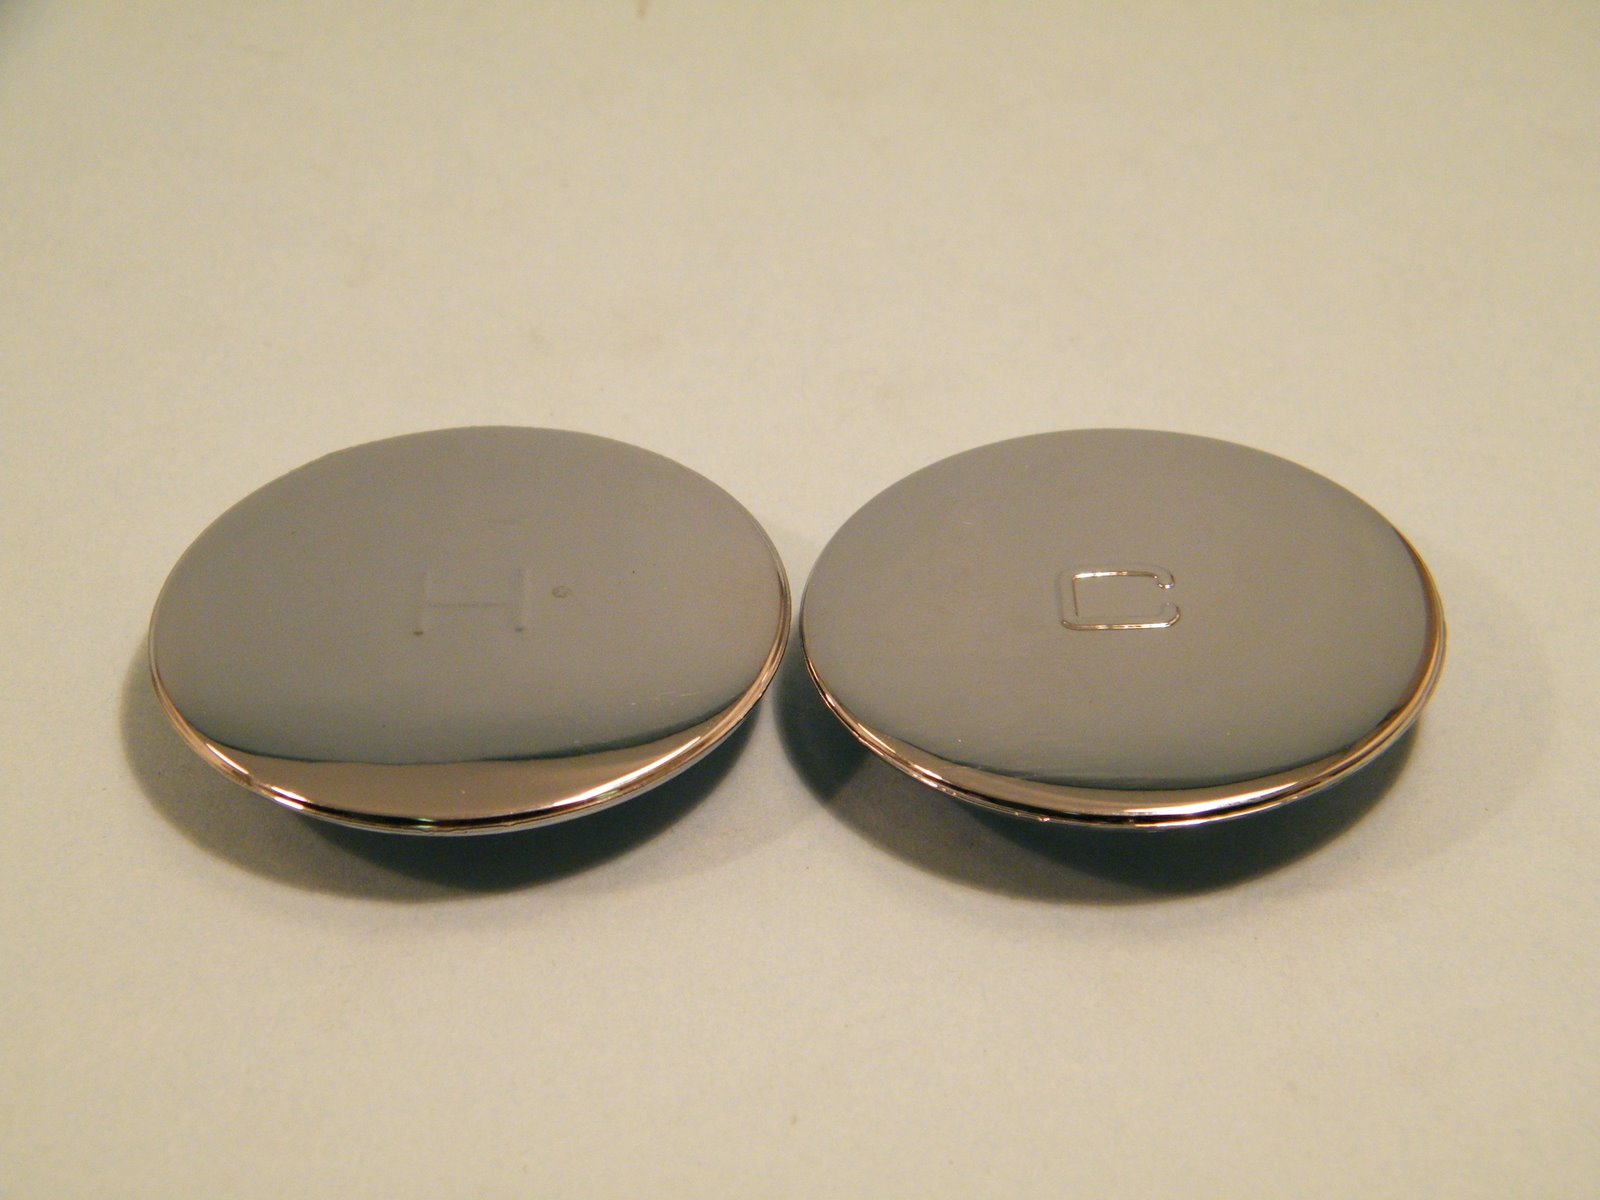 AMERICAN STANDARD INDEX BUTTONS-HOT &amp; COLD PAIR